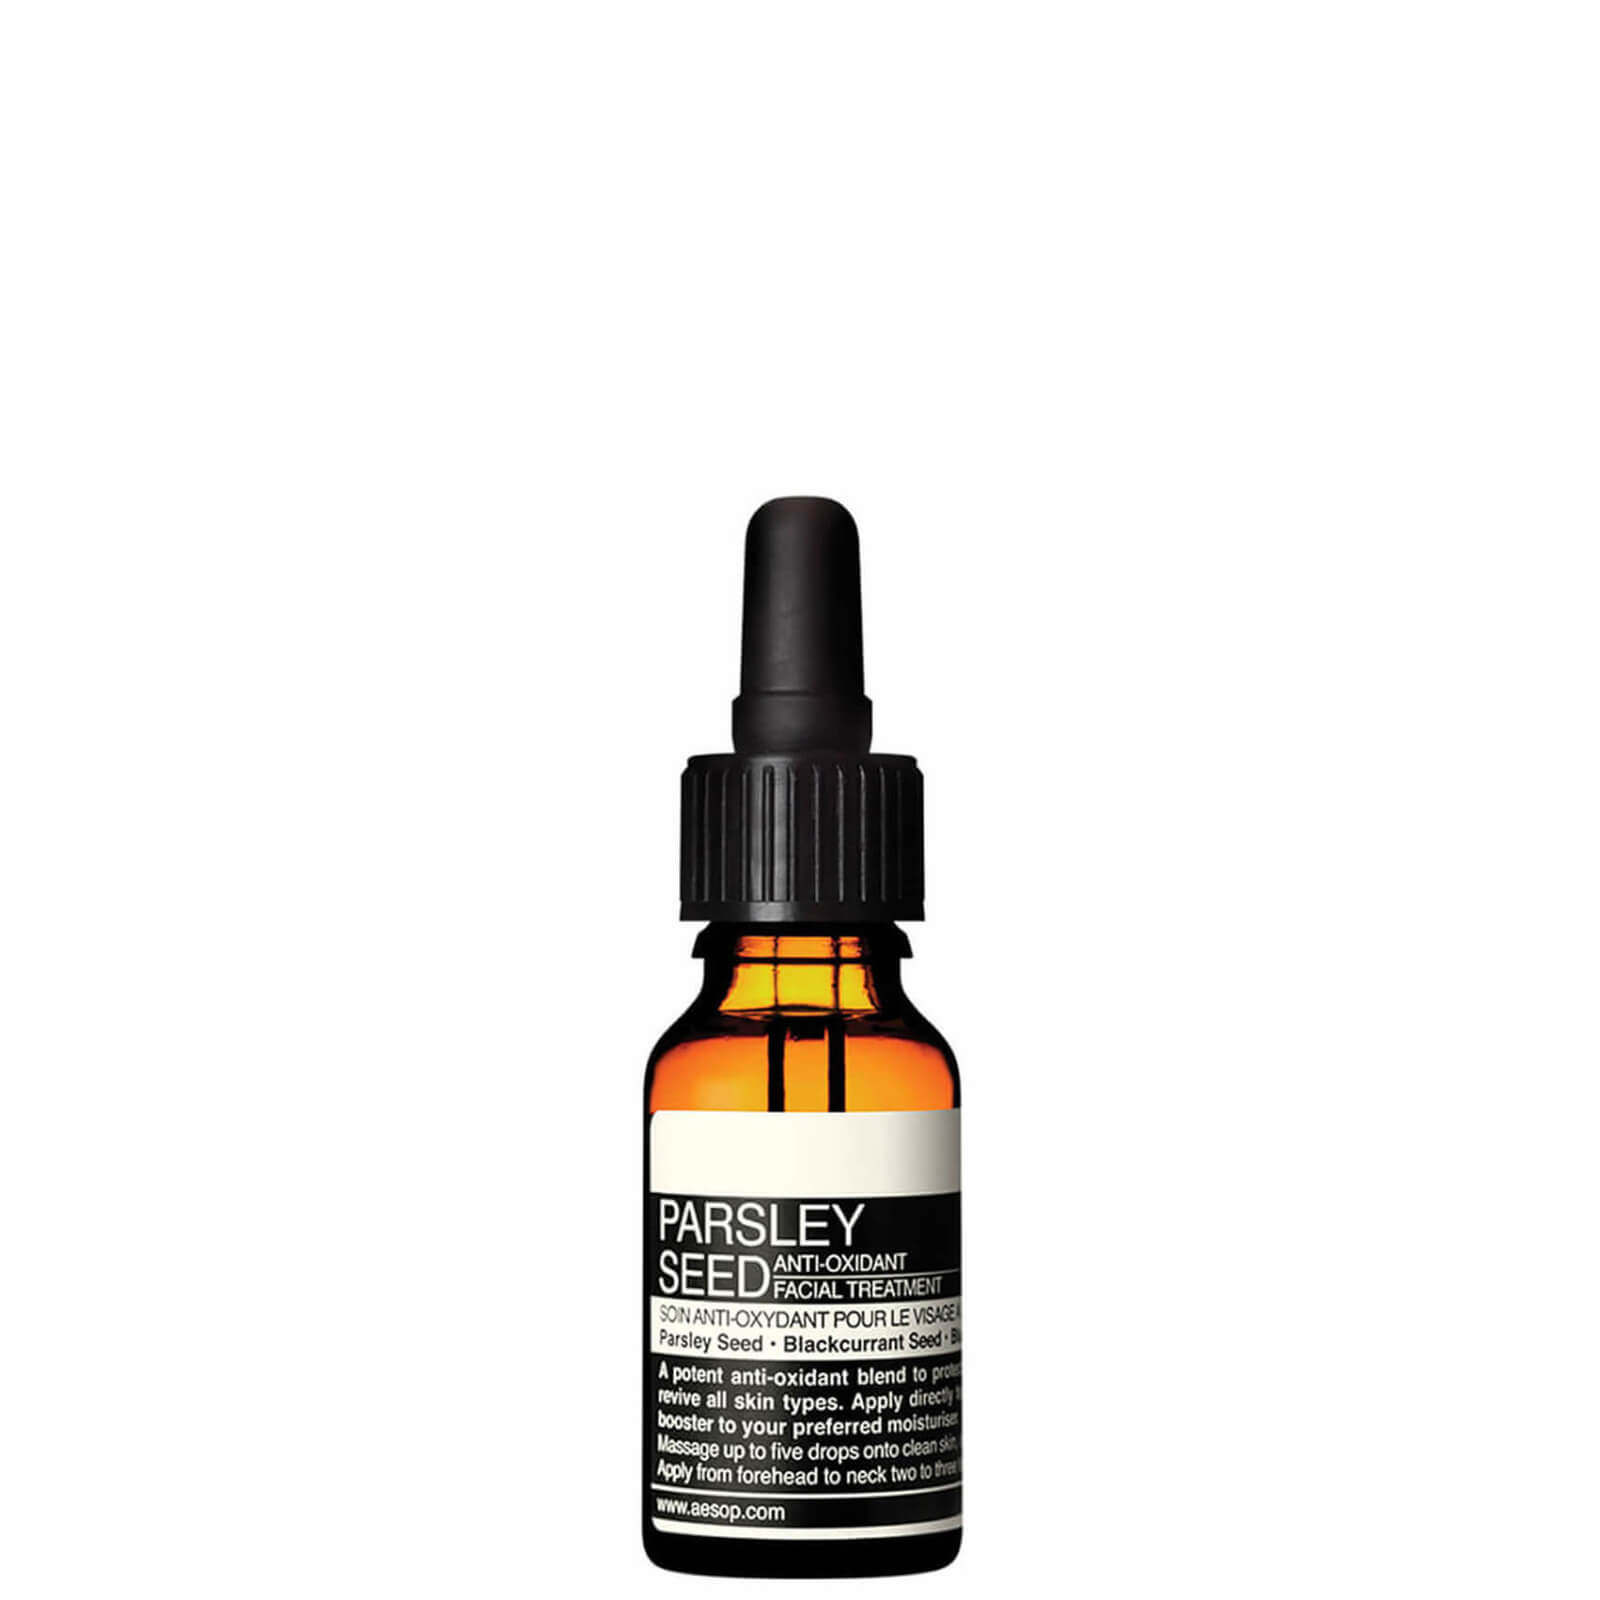 Image of Aesop Parsley Seed Anti-Oxidant Facial Treatment 15ml